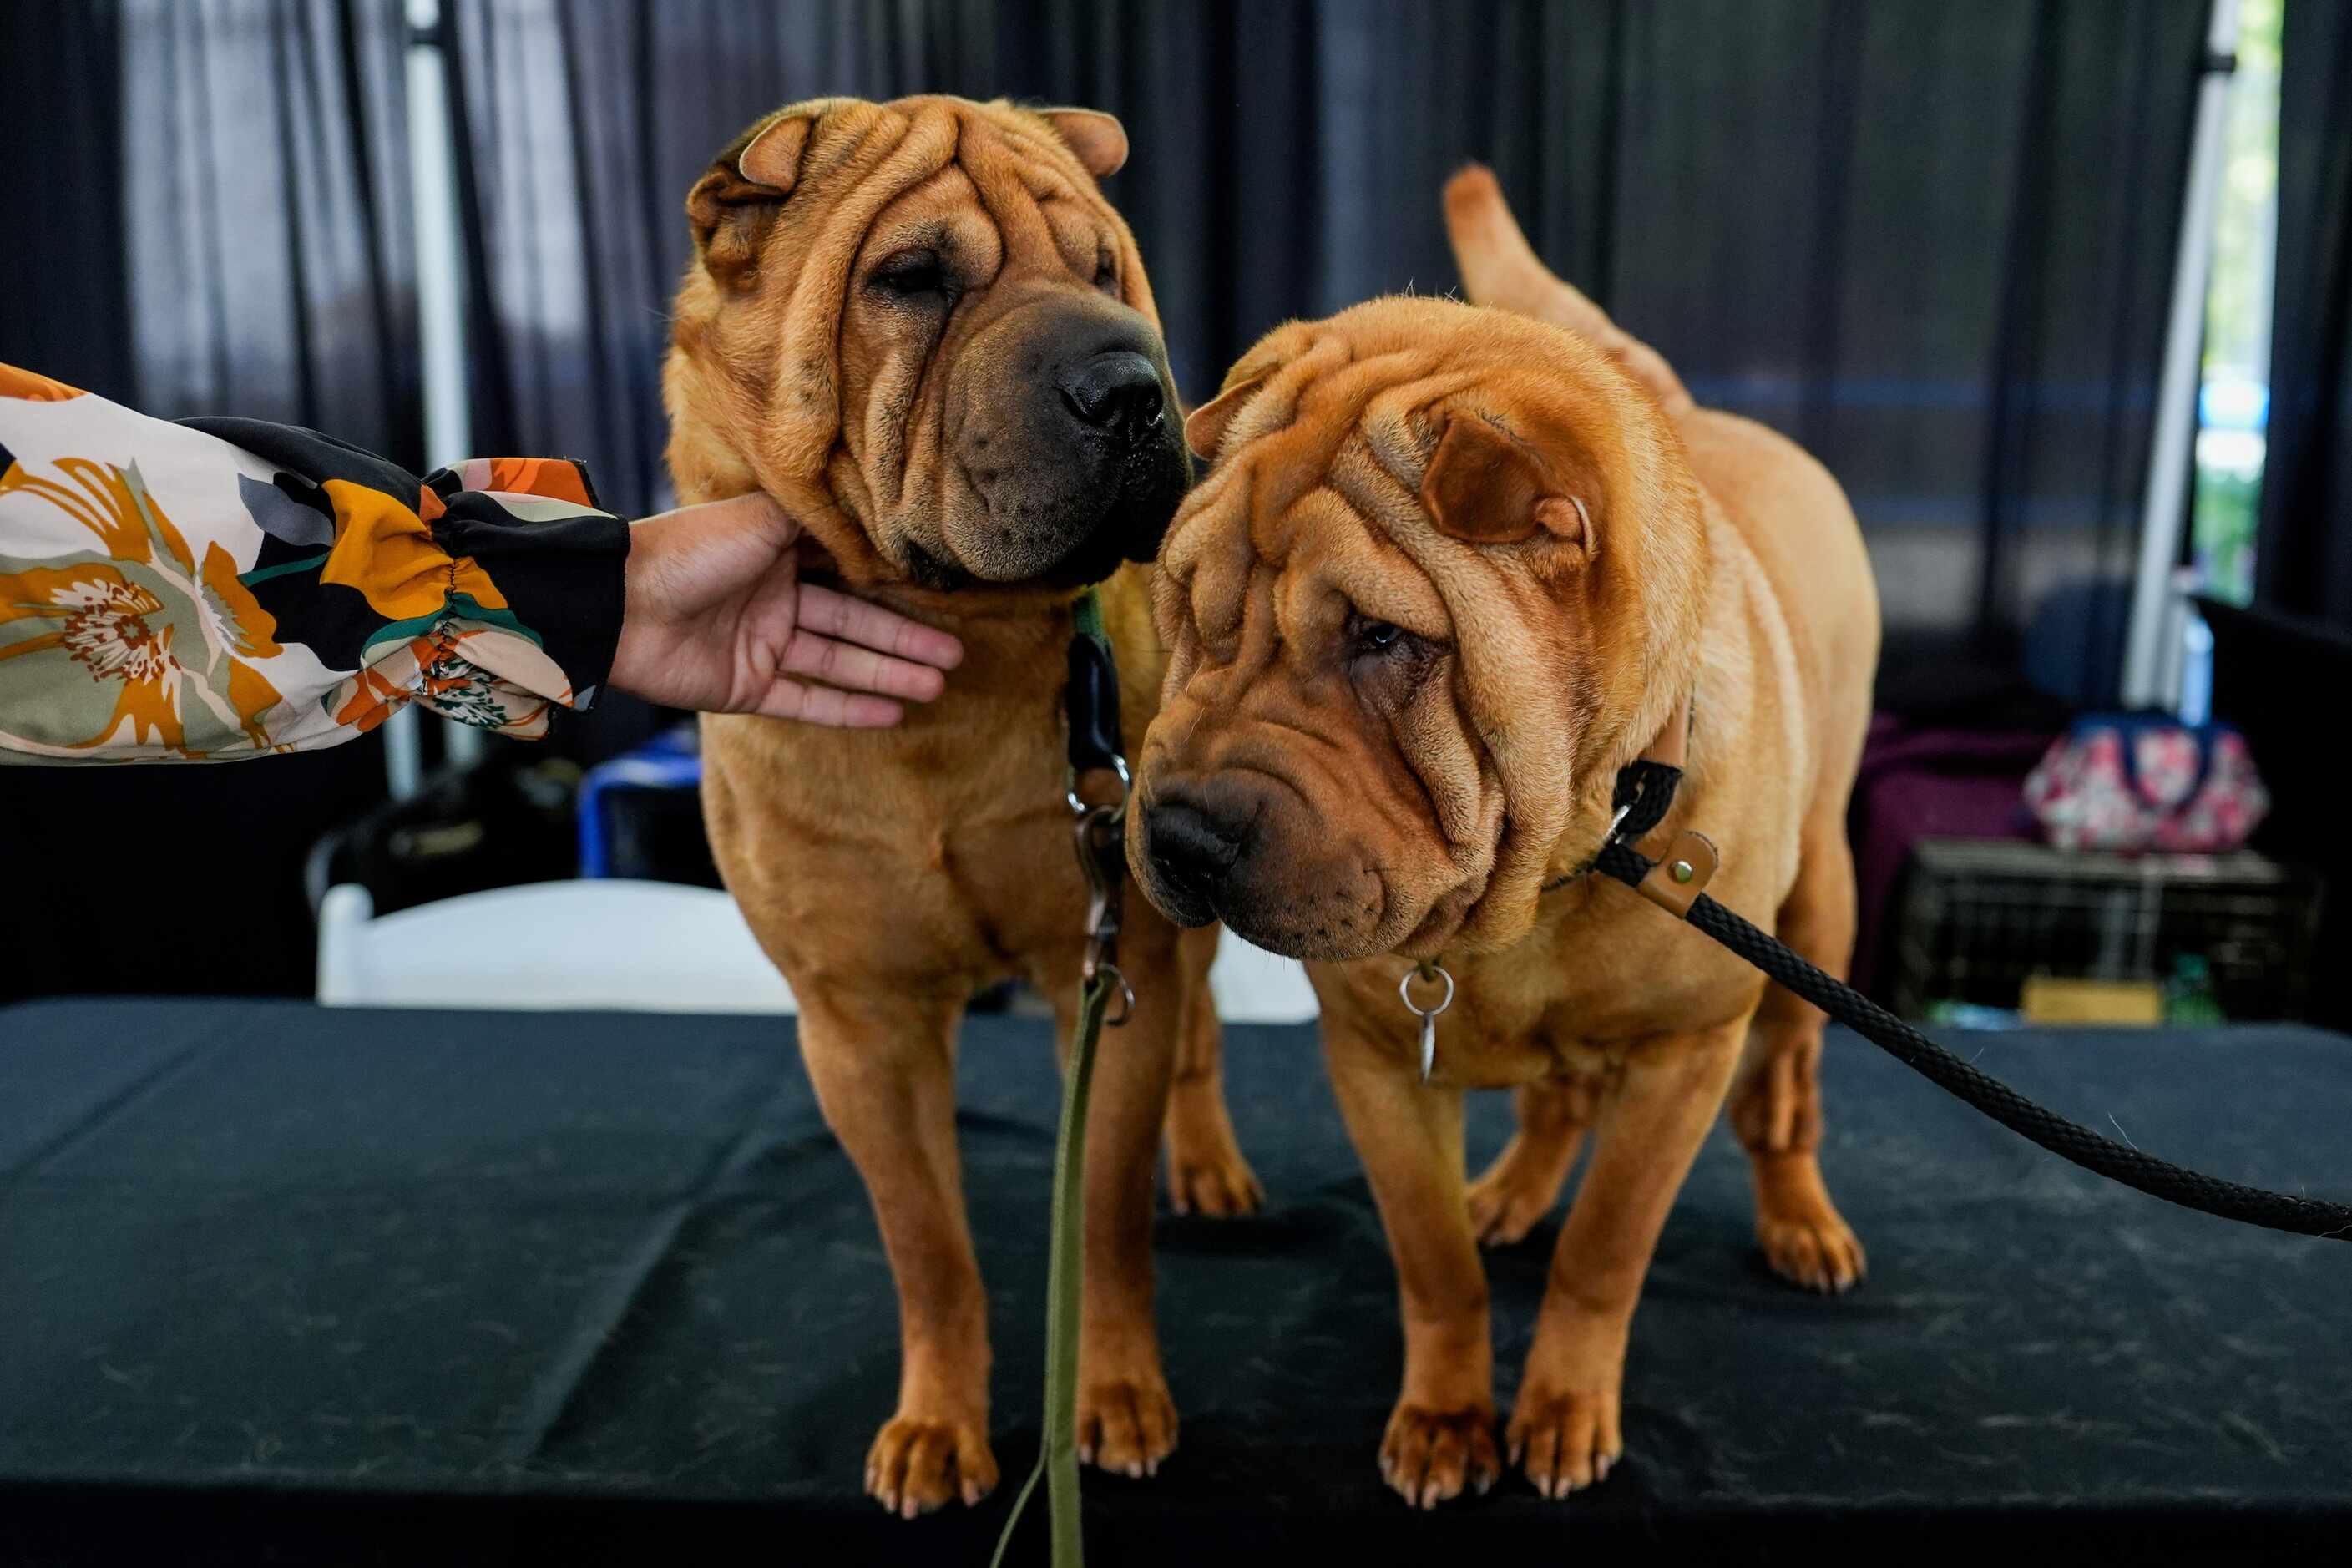 Shar peis stand in the Breed Showcase area during the 148th Westminster Kennel Club Dog...